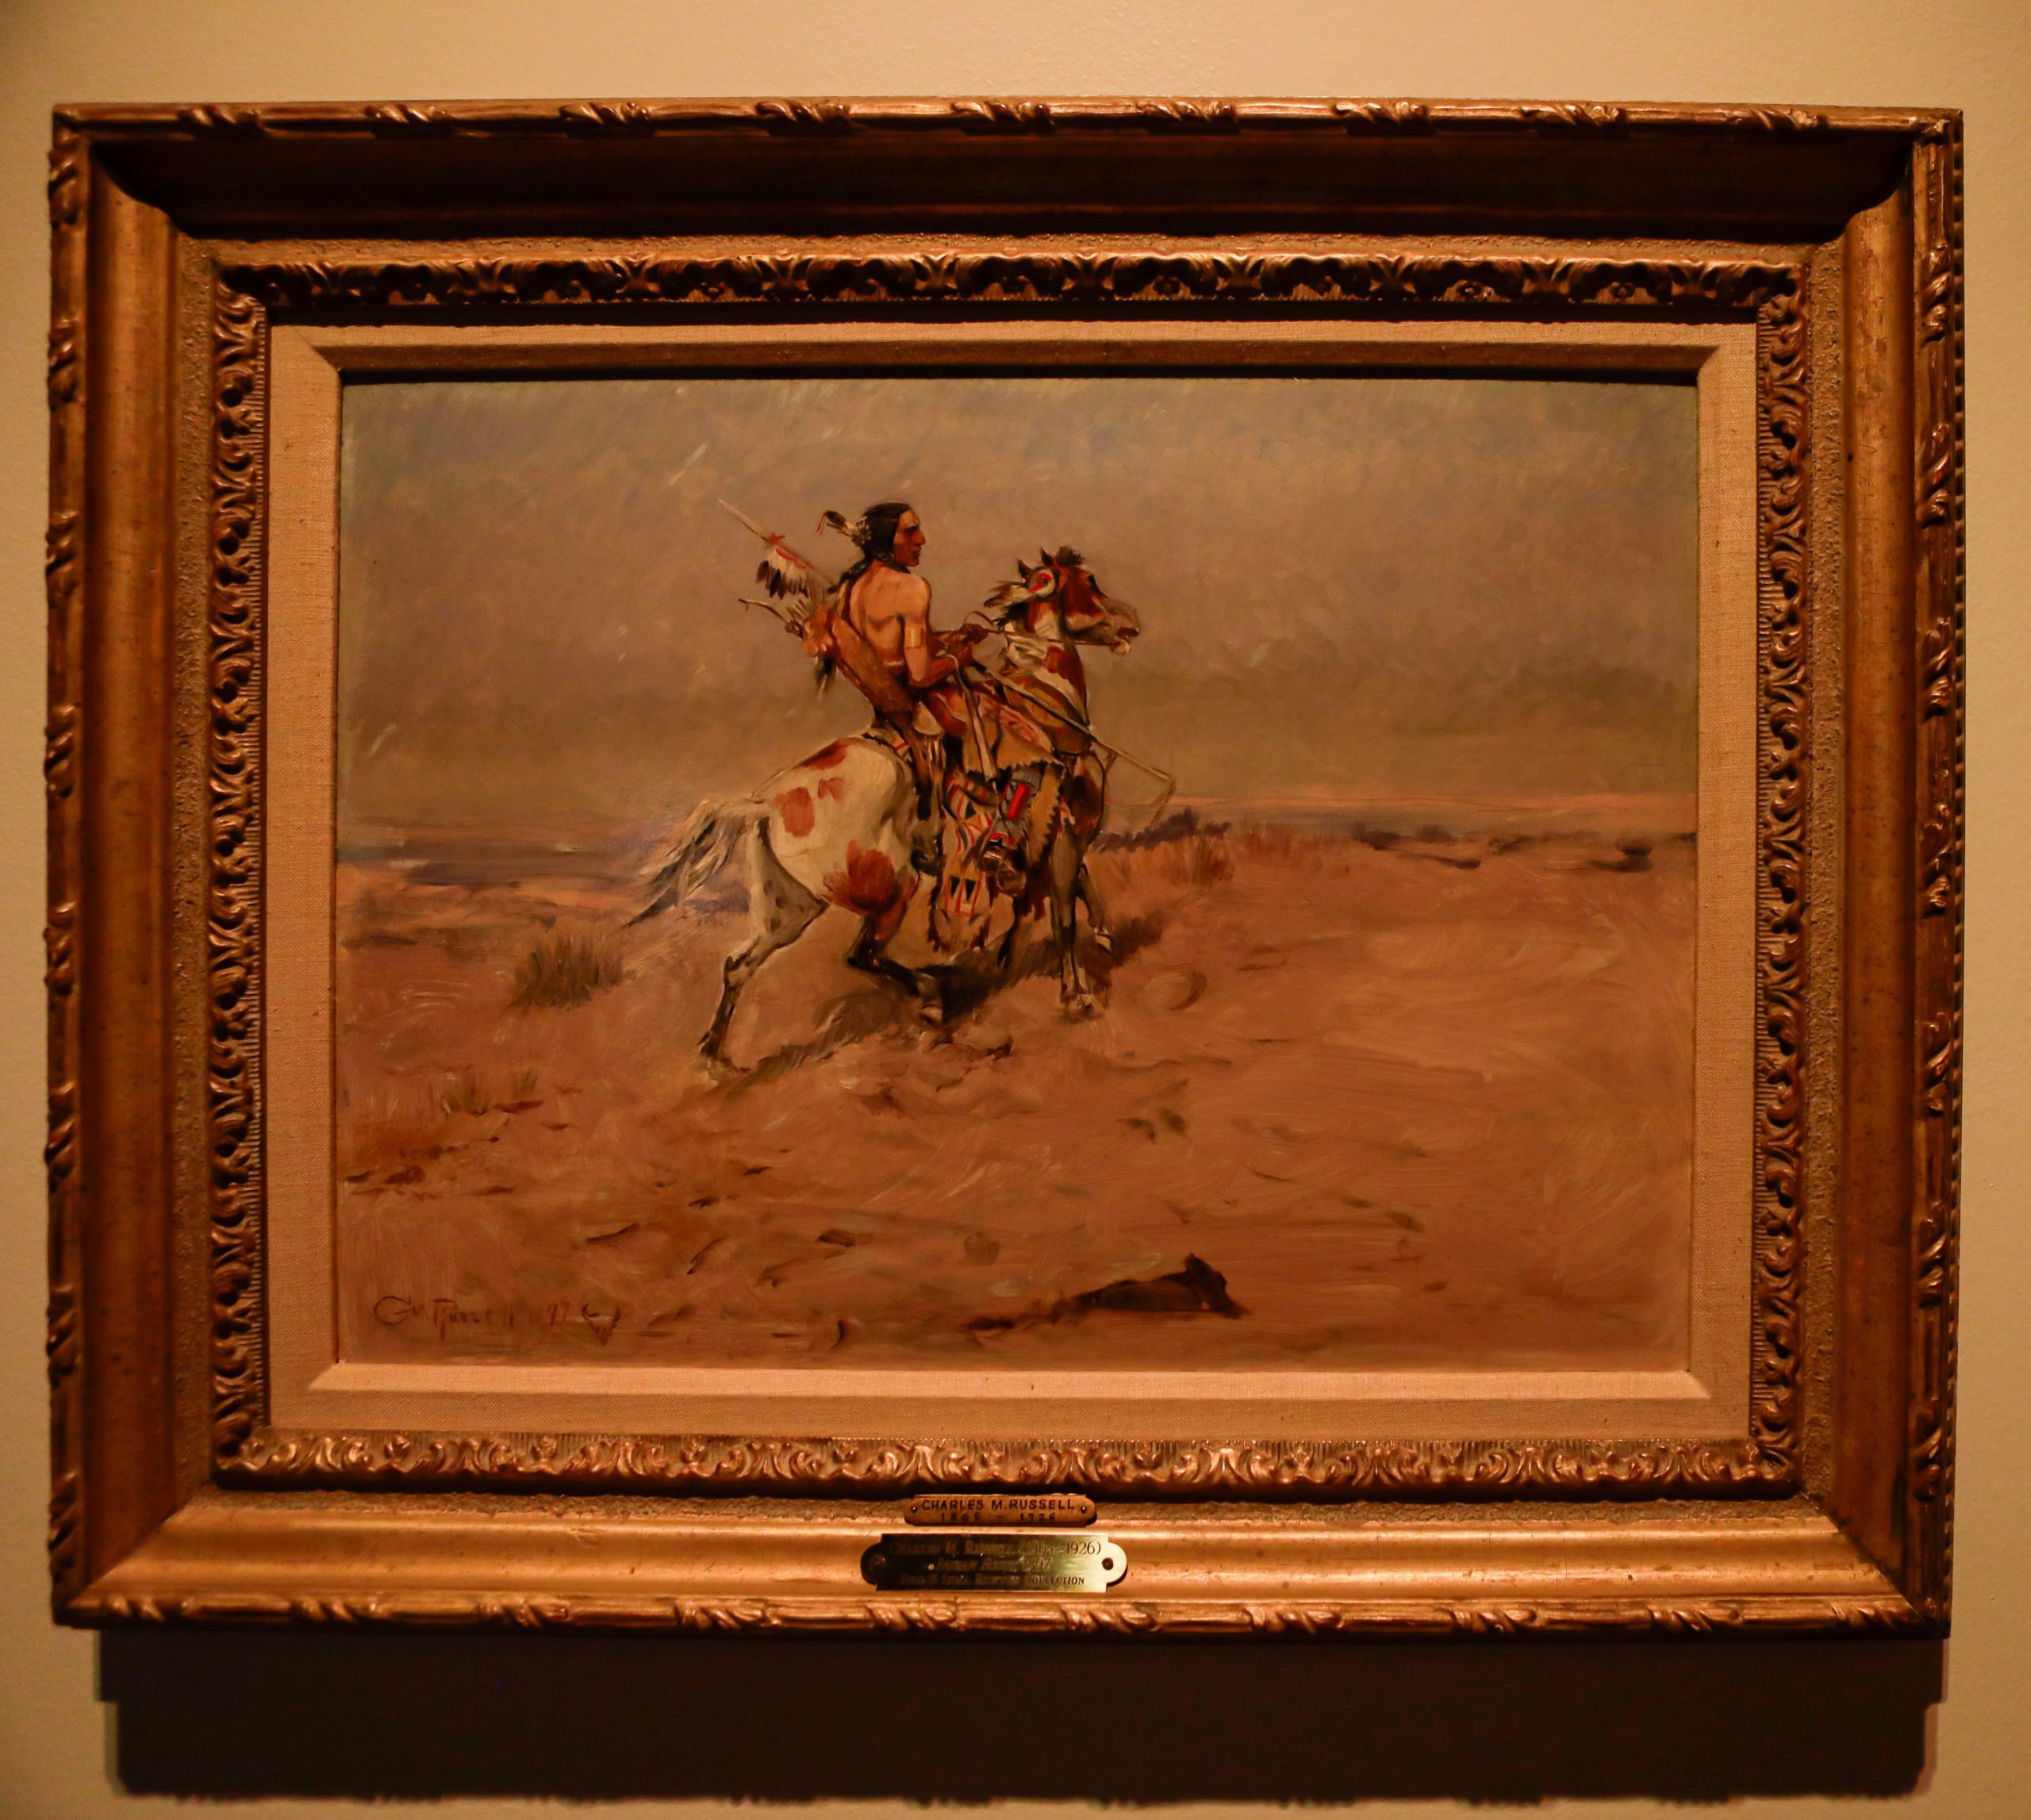 Oil painting of a Native American on horseback. This image shows the painting as it would look under gas lighting.